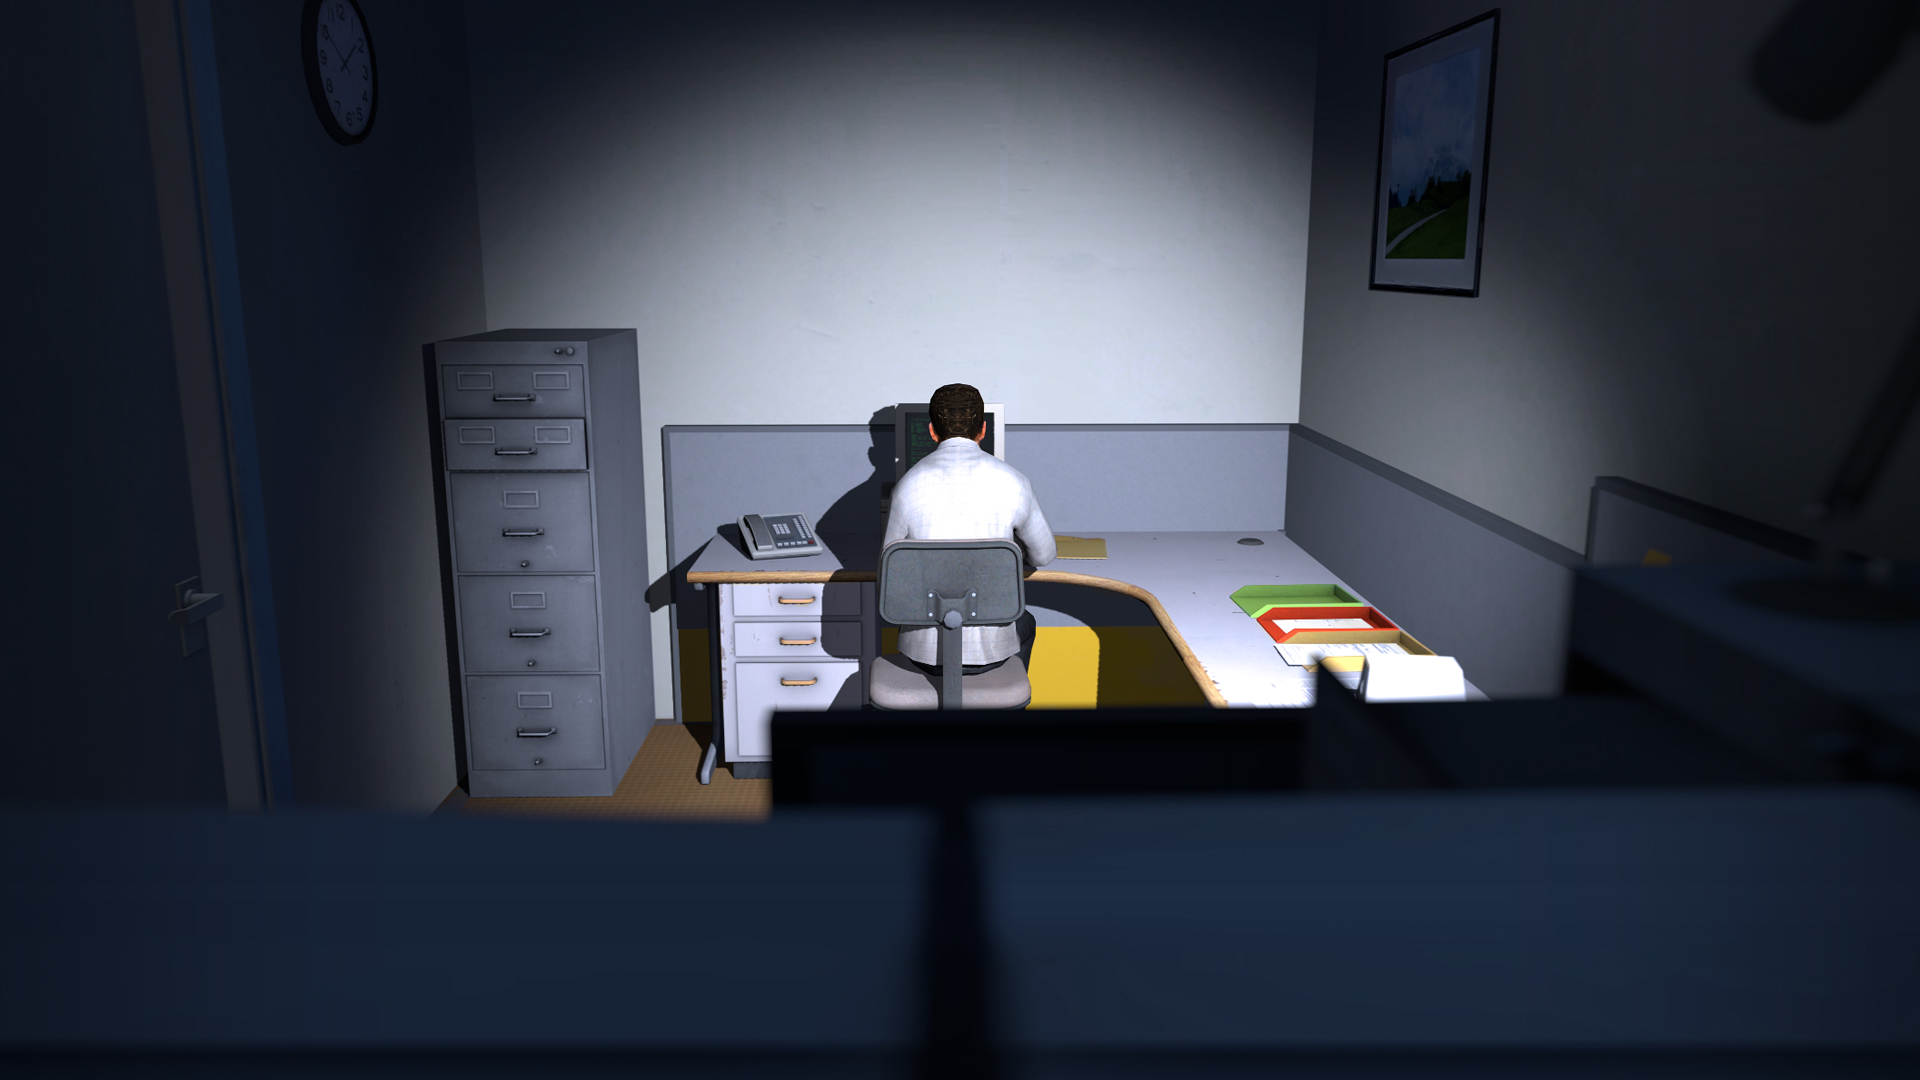 The Stanley Parable Demo Featured Screenshot #1